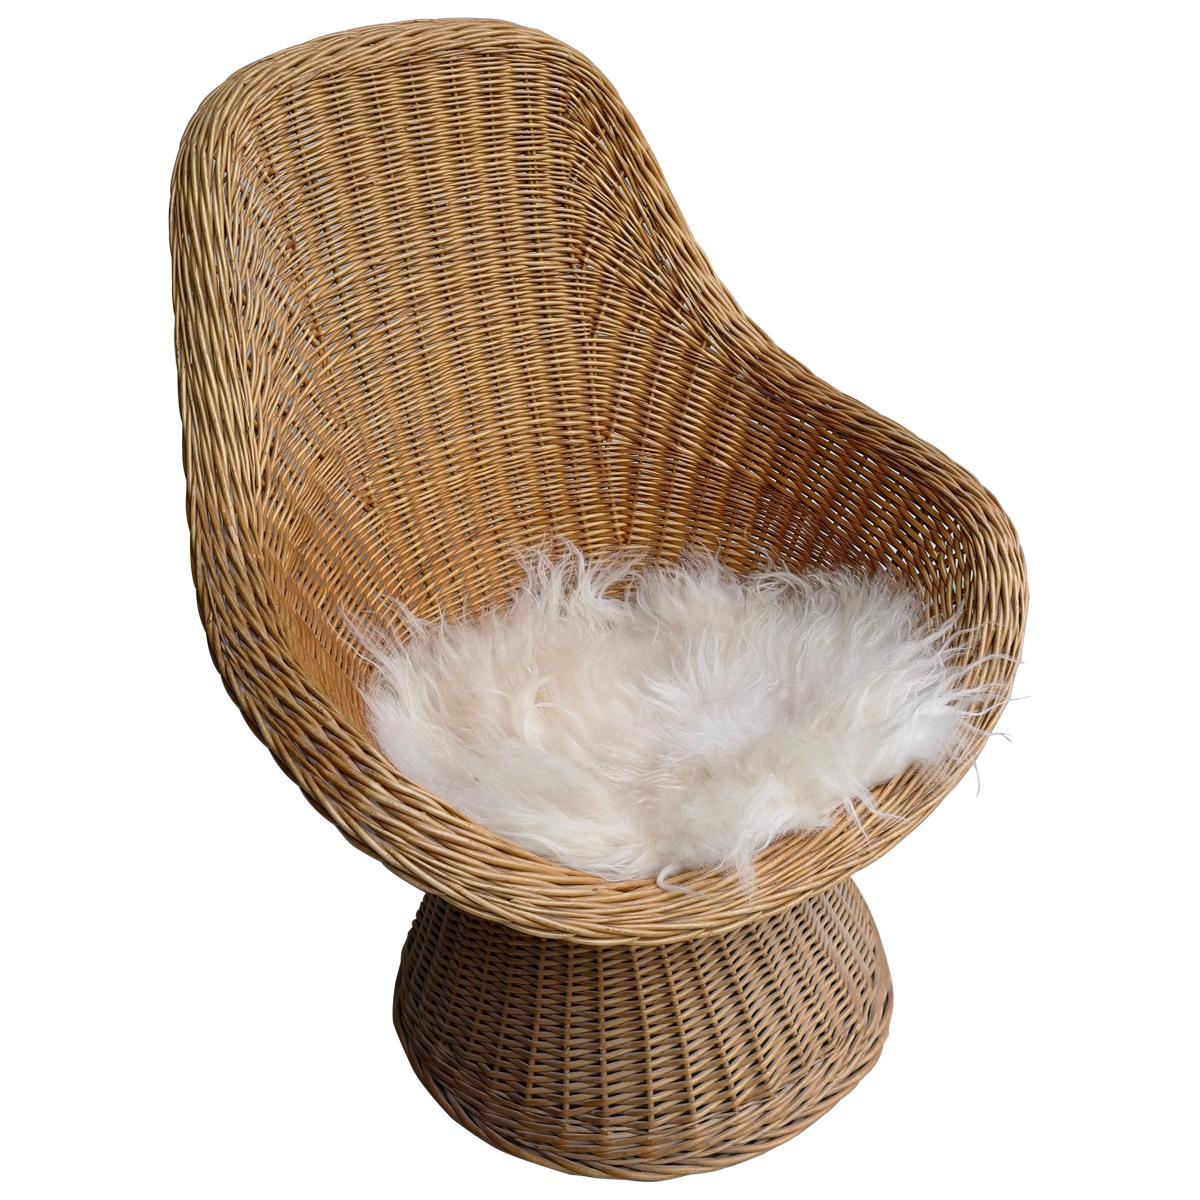 Hand Twined Blond Willow Lounge Chair with White Sheep Wool Pillow